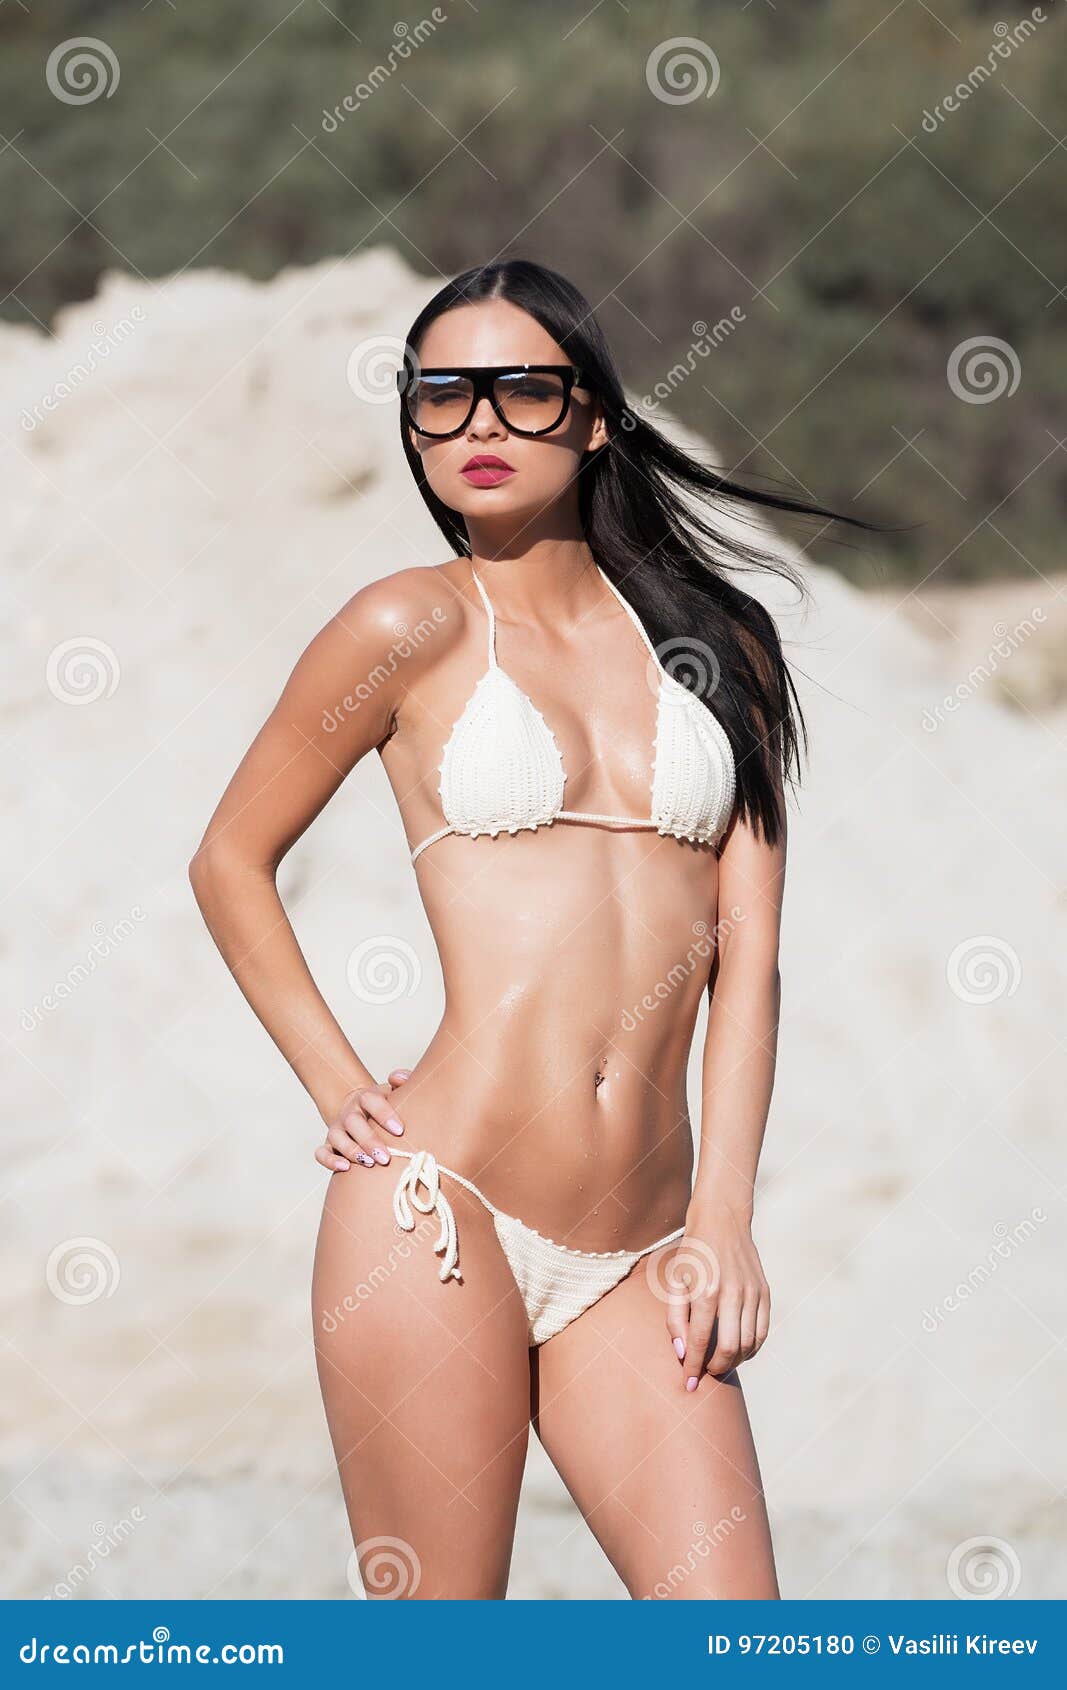 Photo about Girl in a swimsuit on the beach. 